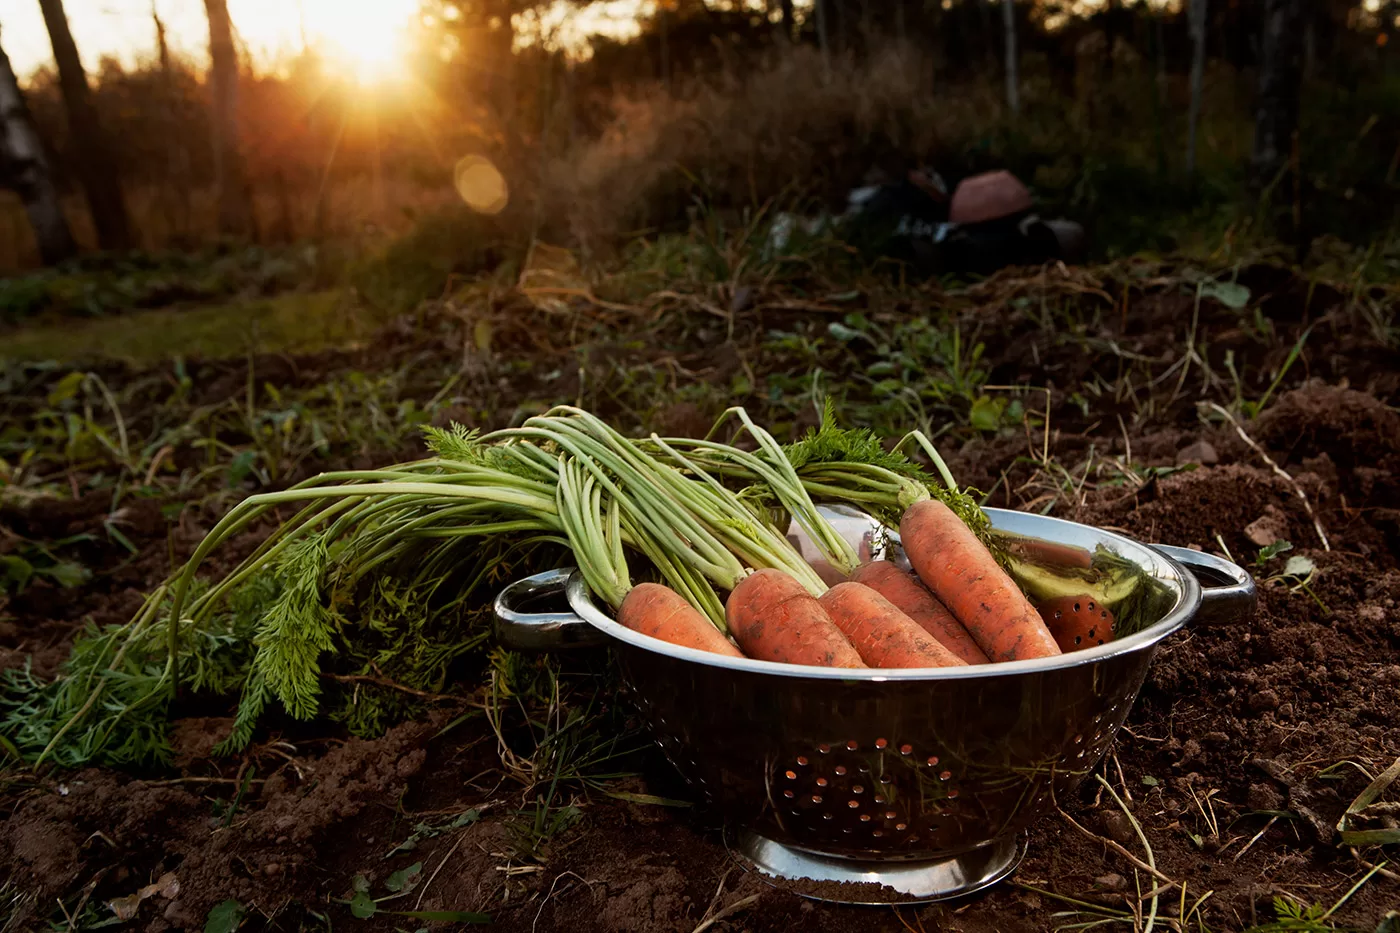 Farm to Table Carrot Harvest. A bushel of freshly pulled carrots from a garden in a silver colander at sunset.